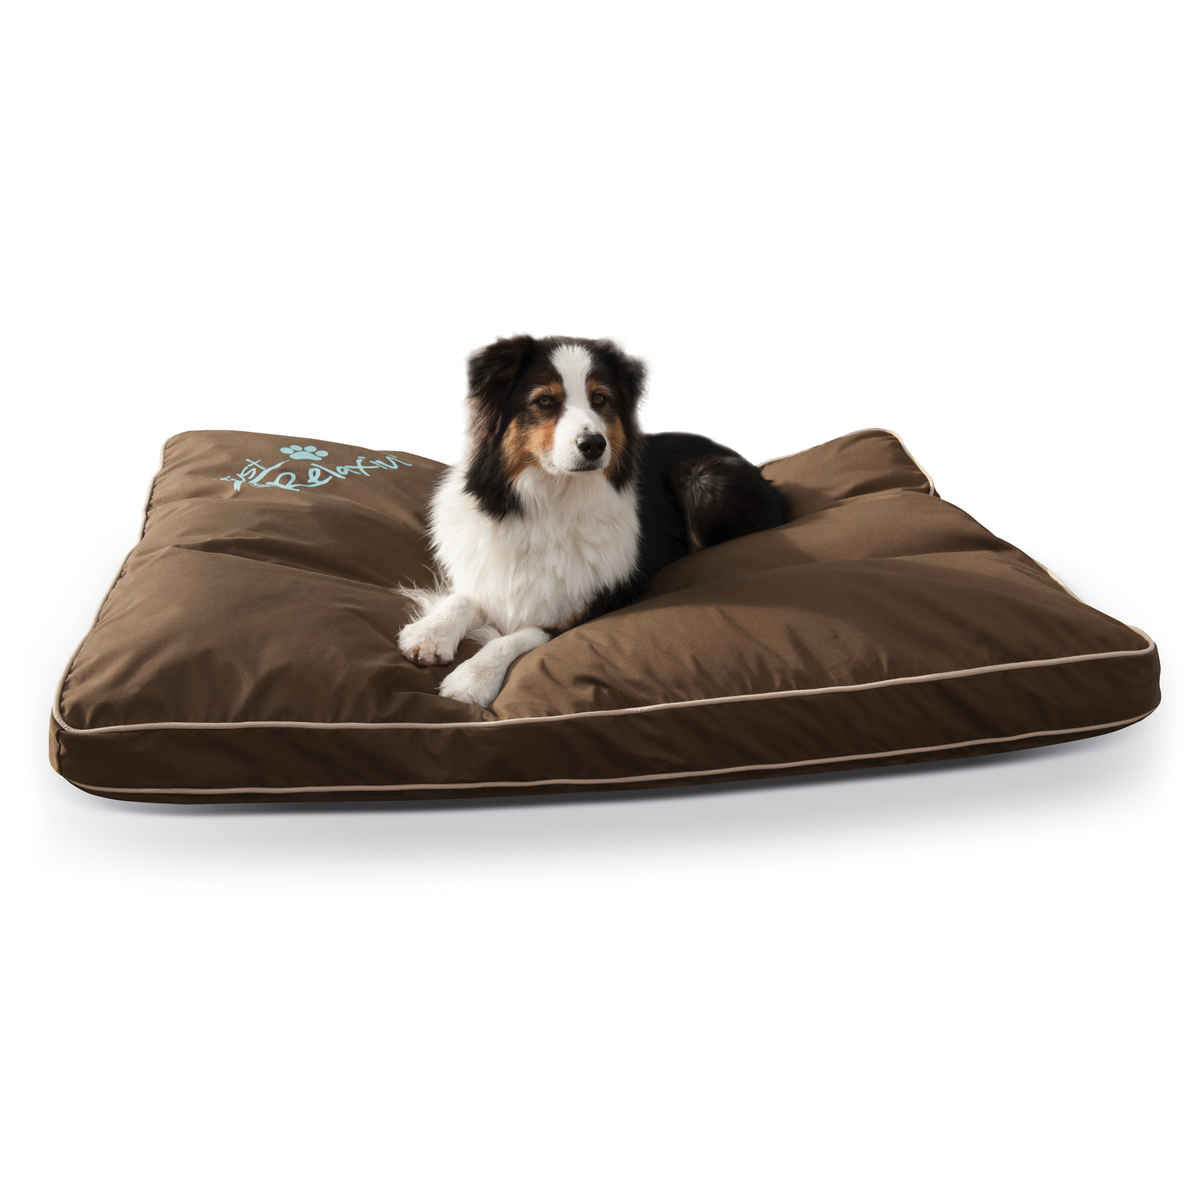 K&h Pet Products Kh7054 Just Relaxin